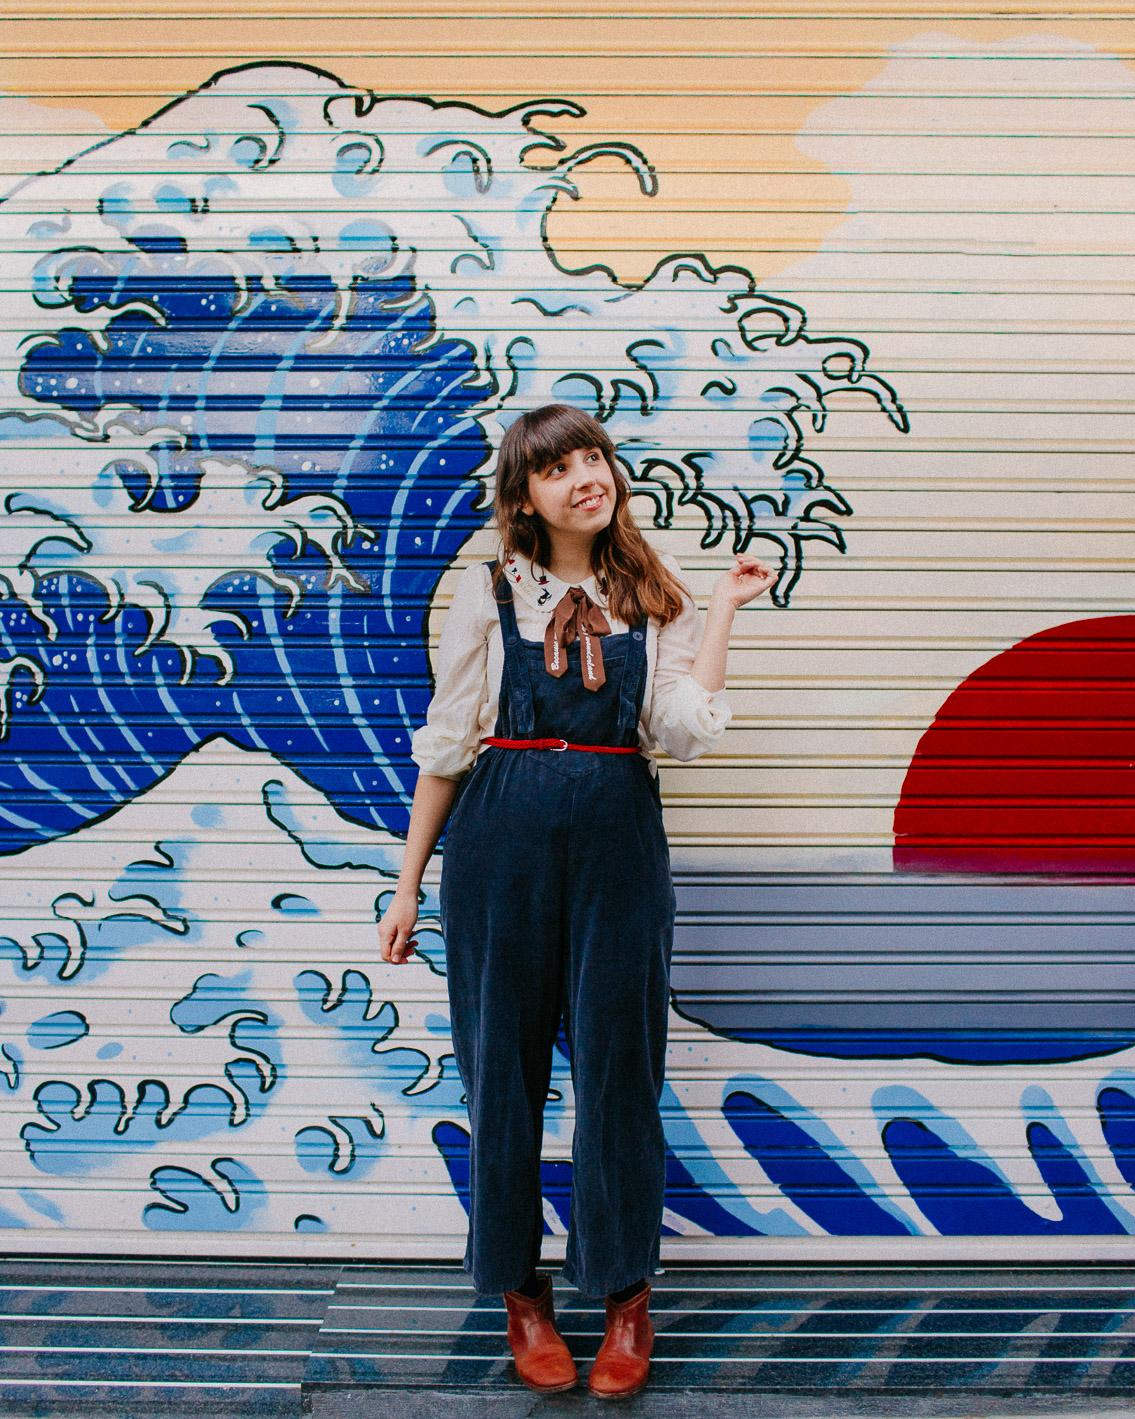 Styling Japanese clothes - The cat, you and us